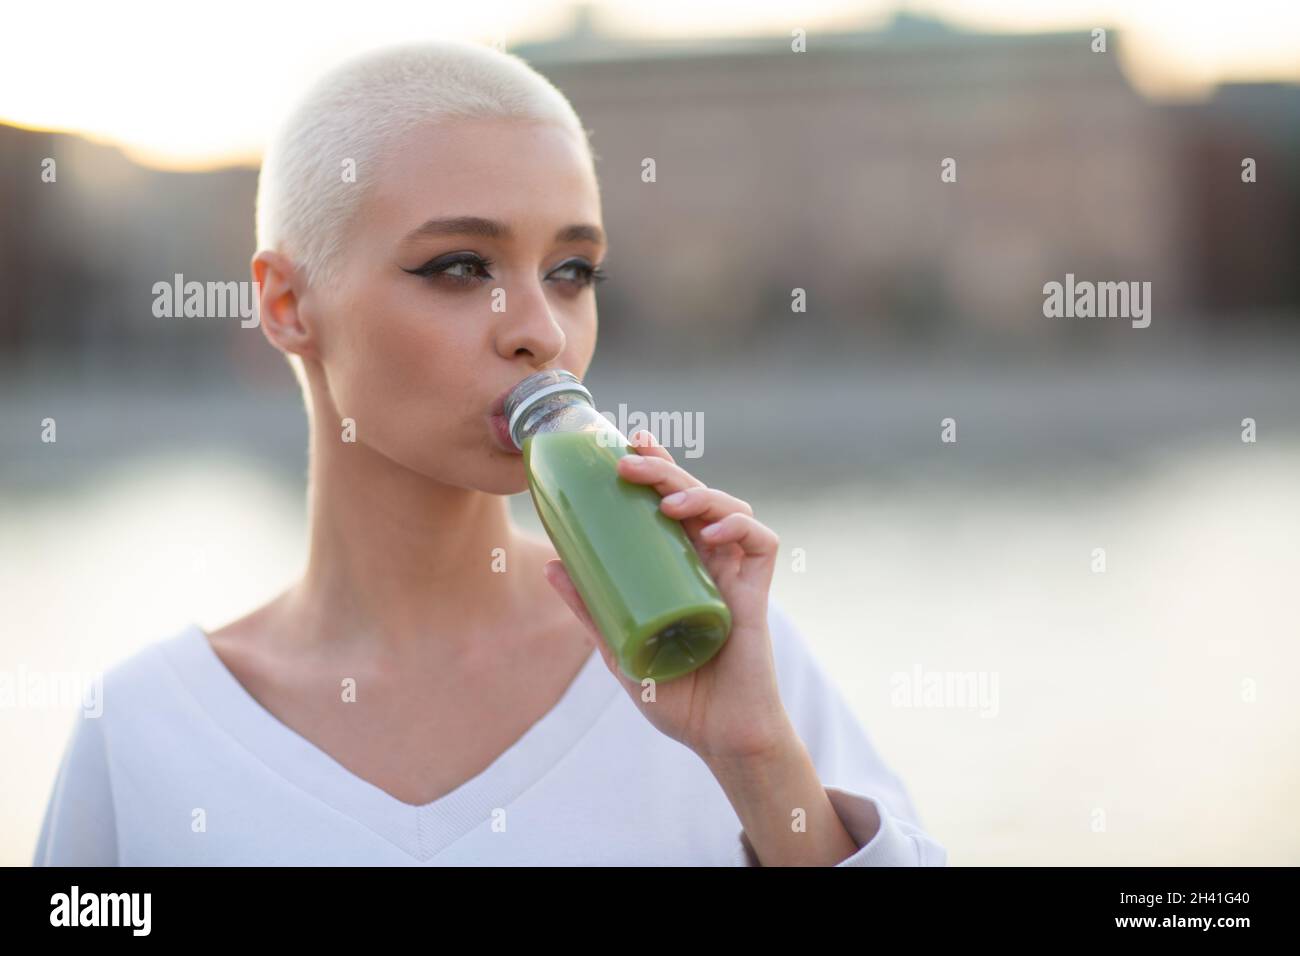 Millenial young woman blonde short hair outdoor with green smoothie Stock Photo